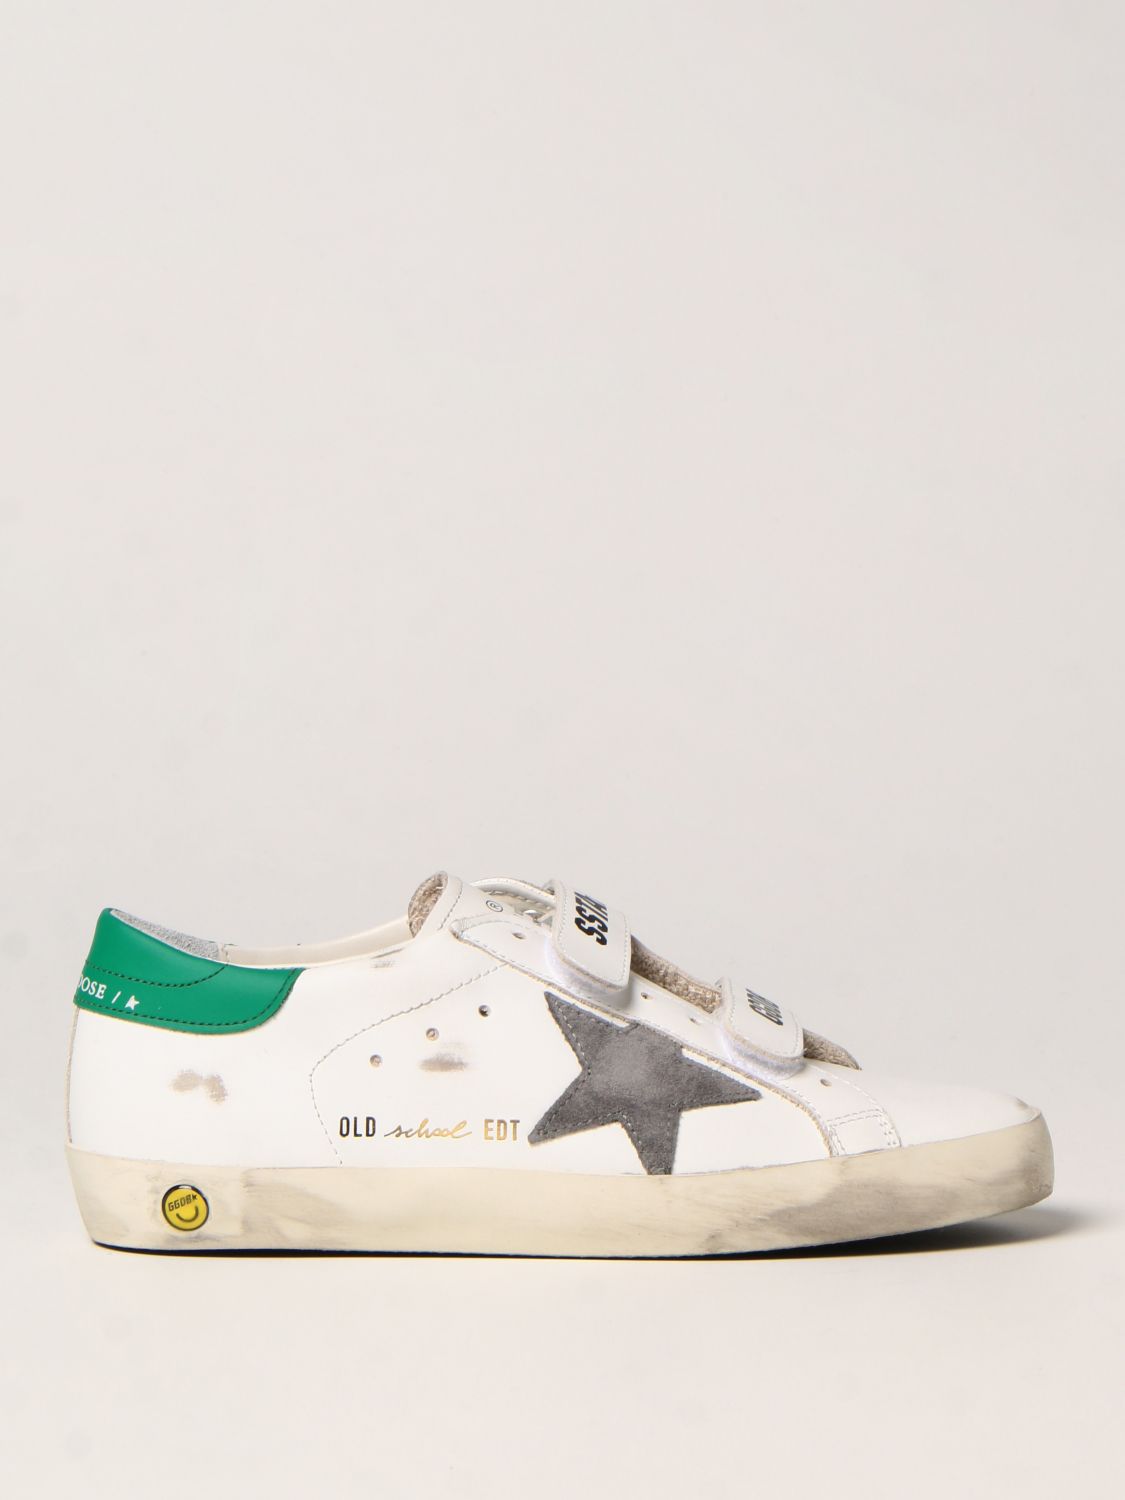 Golden Goose Kids' Old School Sneakers In Worn Leather In White | ModeSens